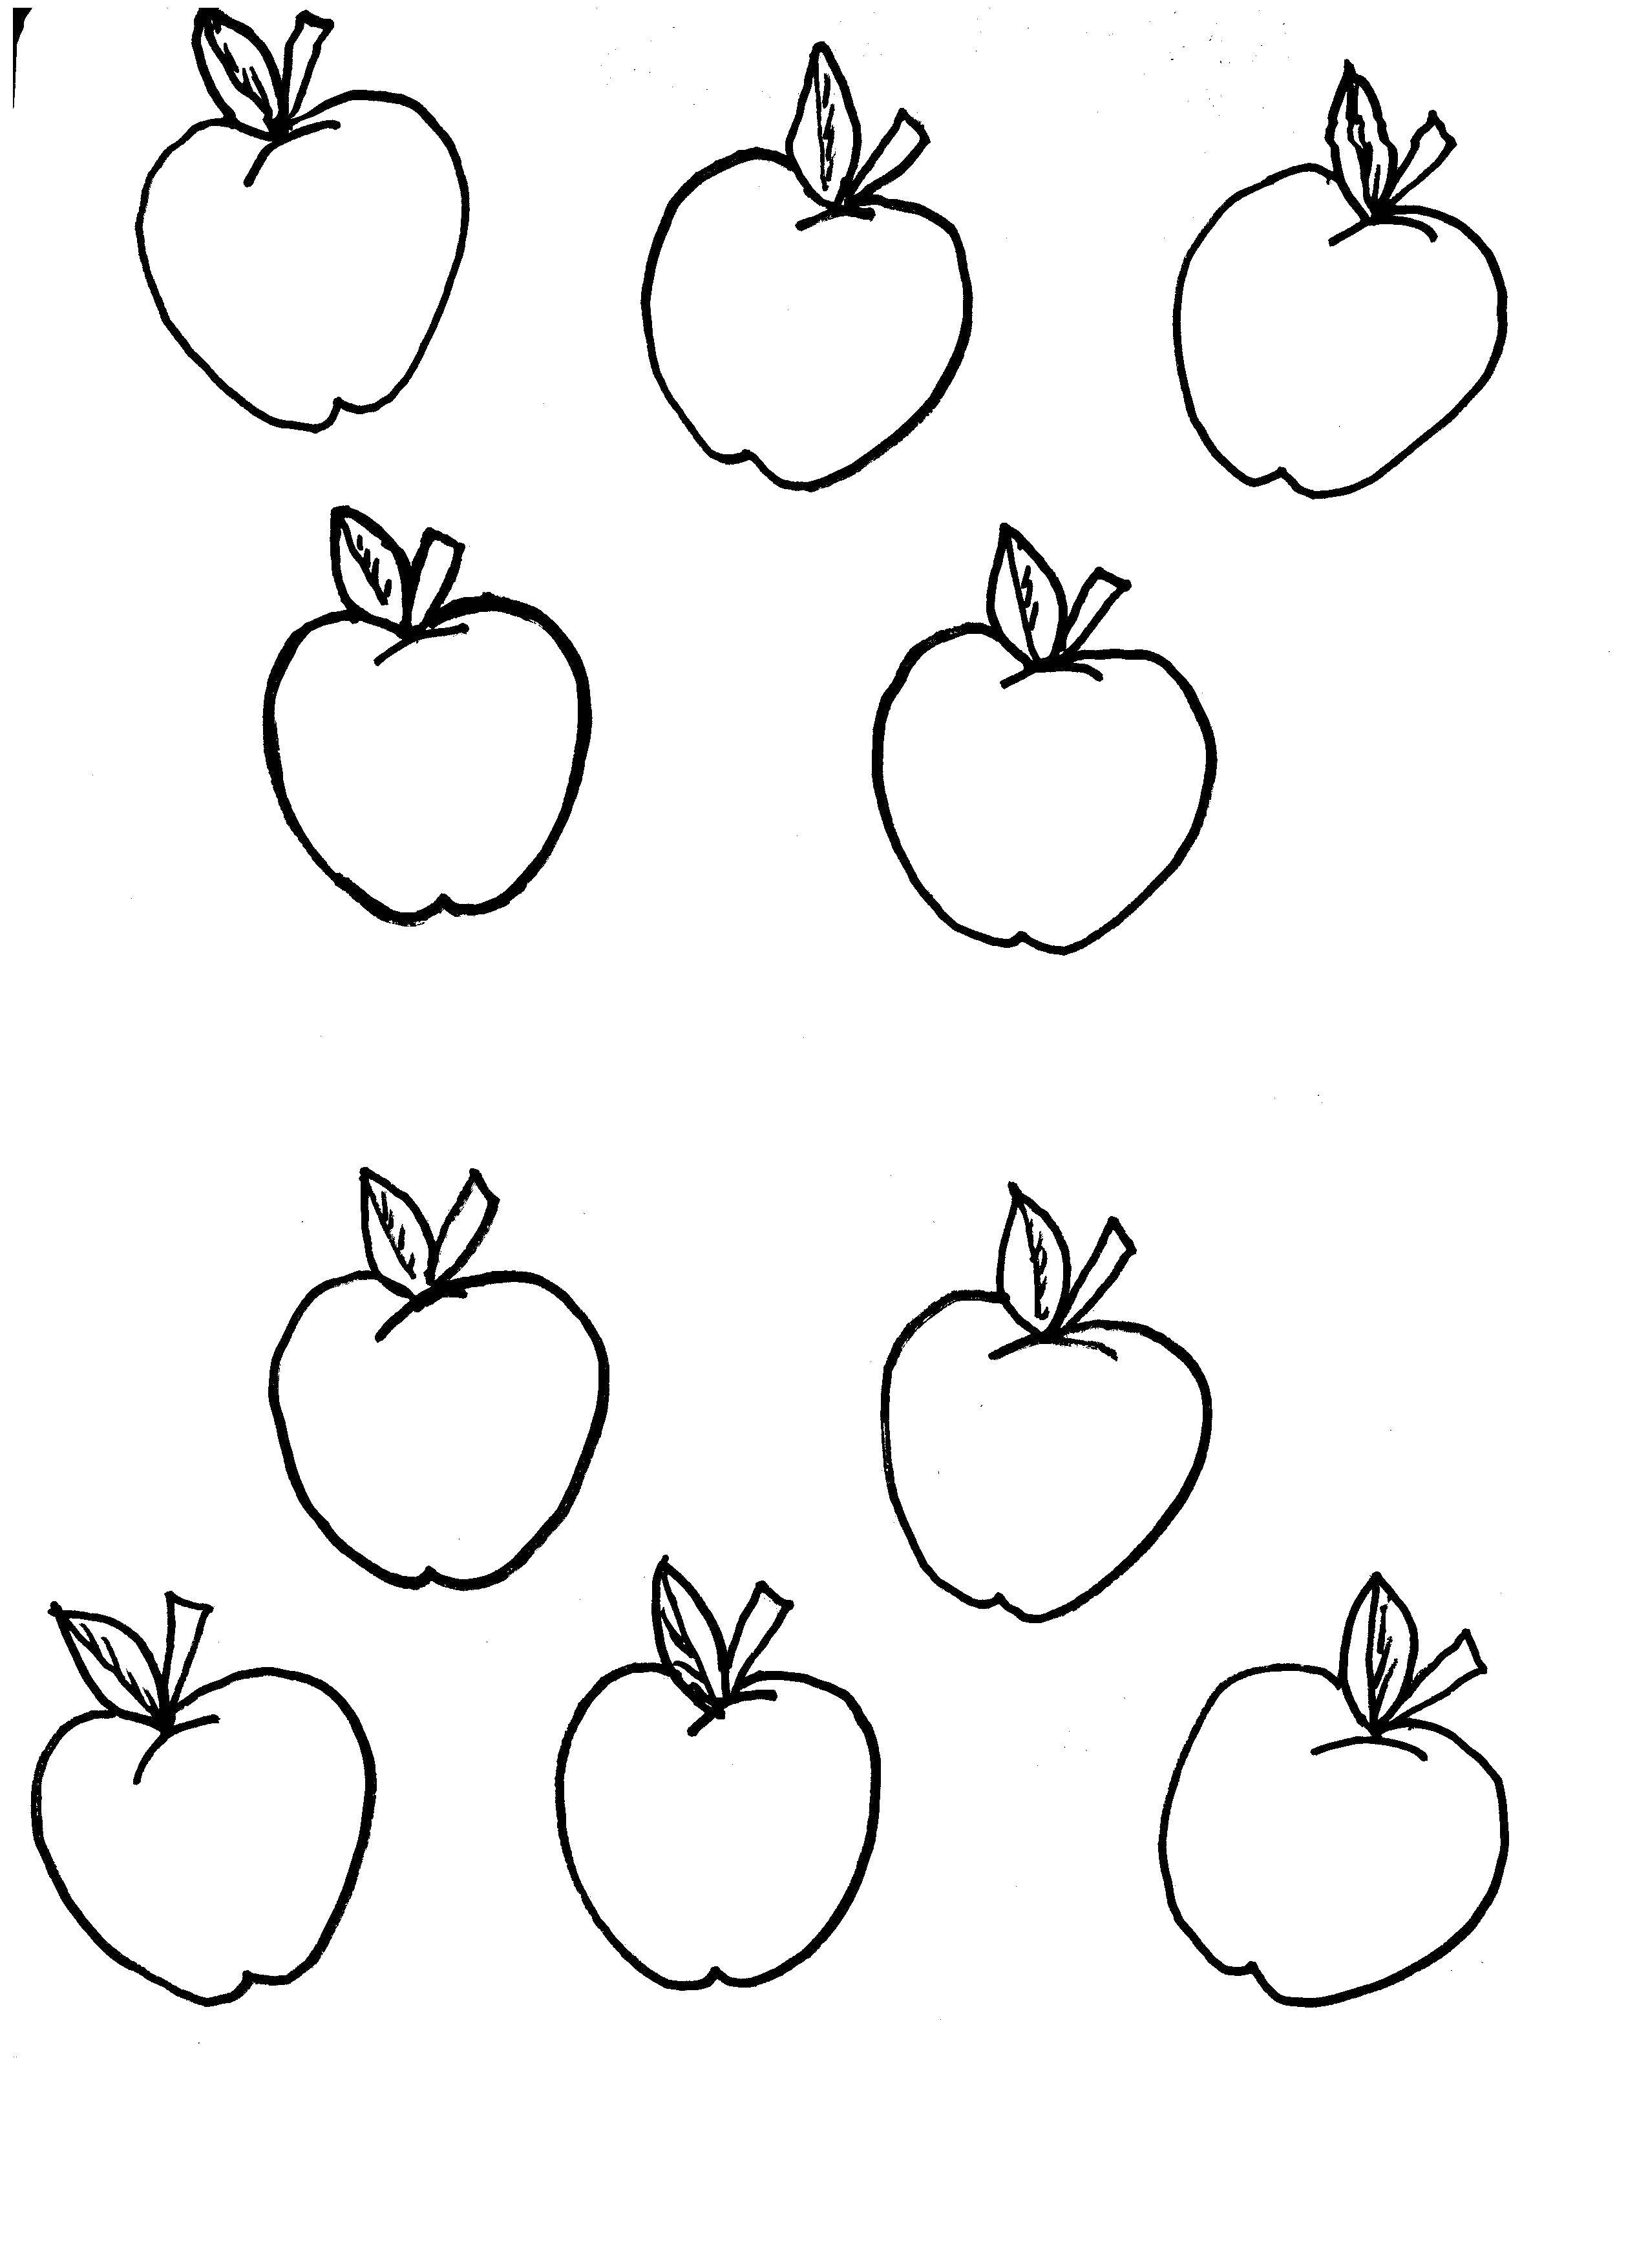 Coloring Apples. Category fruits. Tags:  fruit, apples.